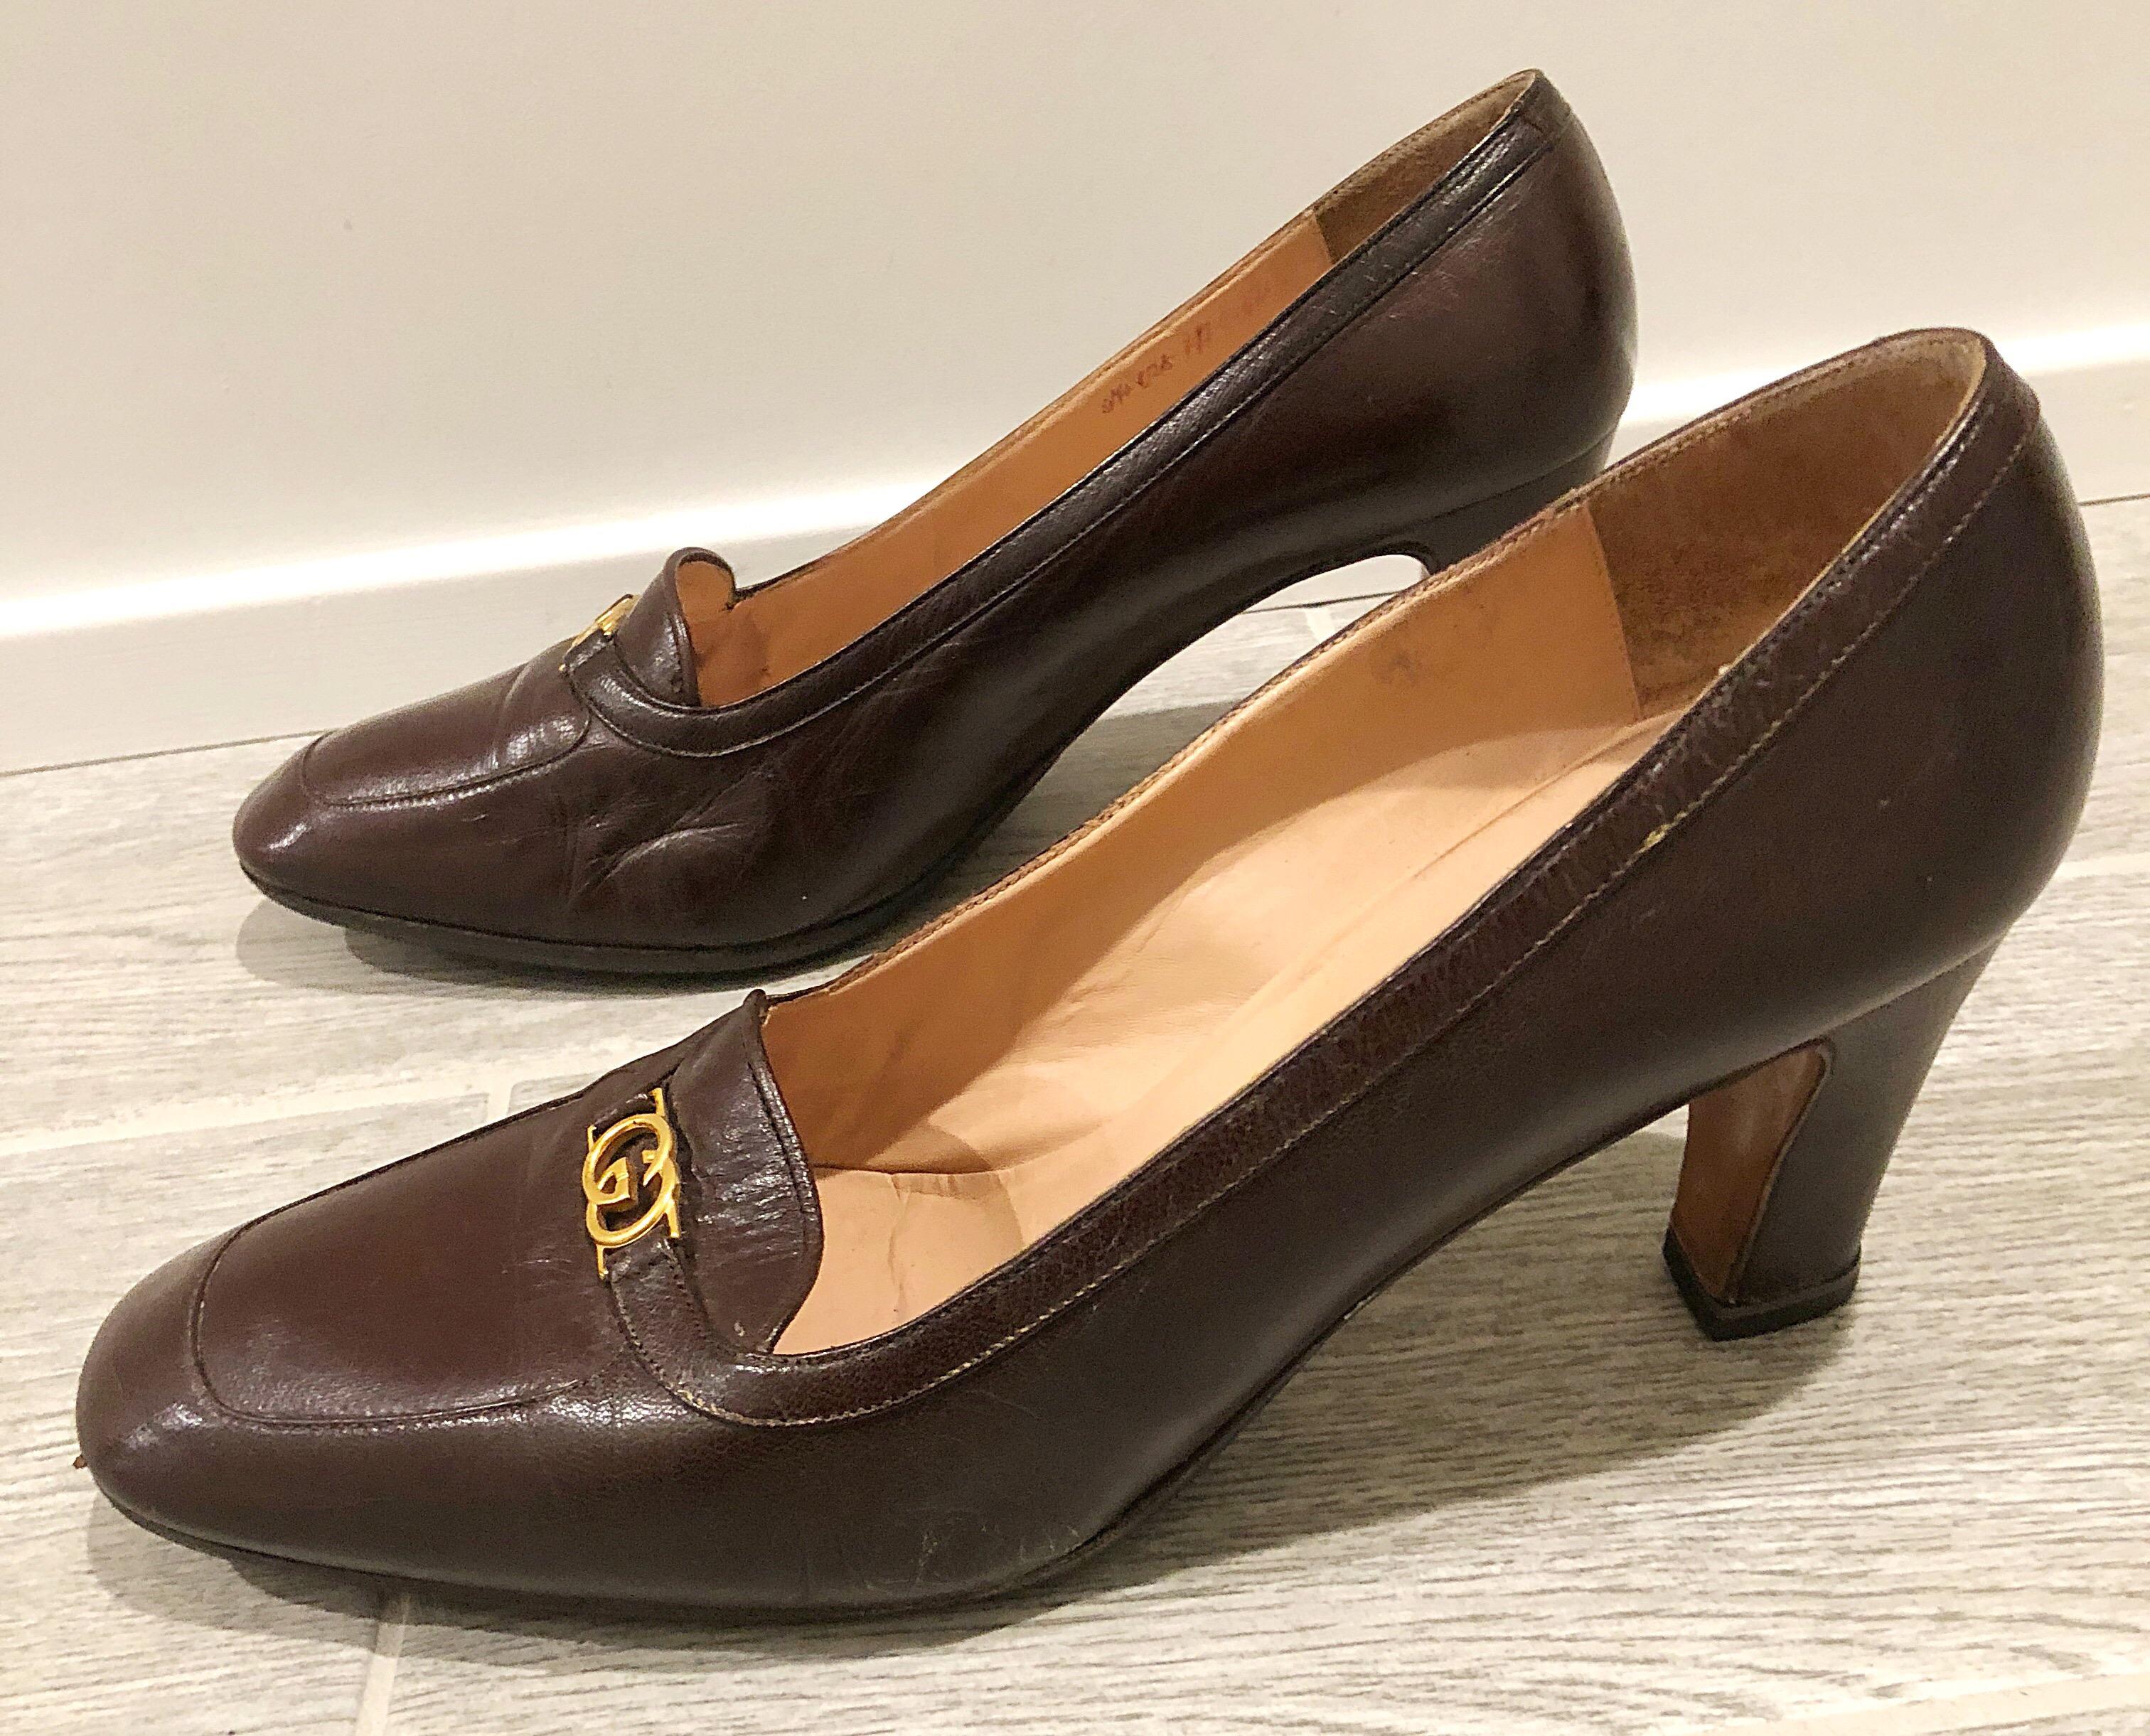 Black Vintage Gucci 1970s Sz 7.5 Chocolate Brown High Heel 70s Loafers Logo Shoes